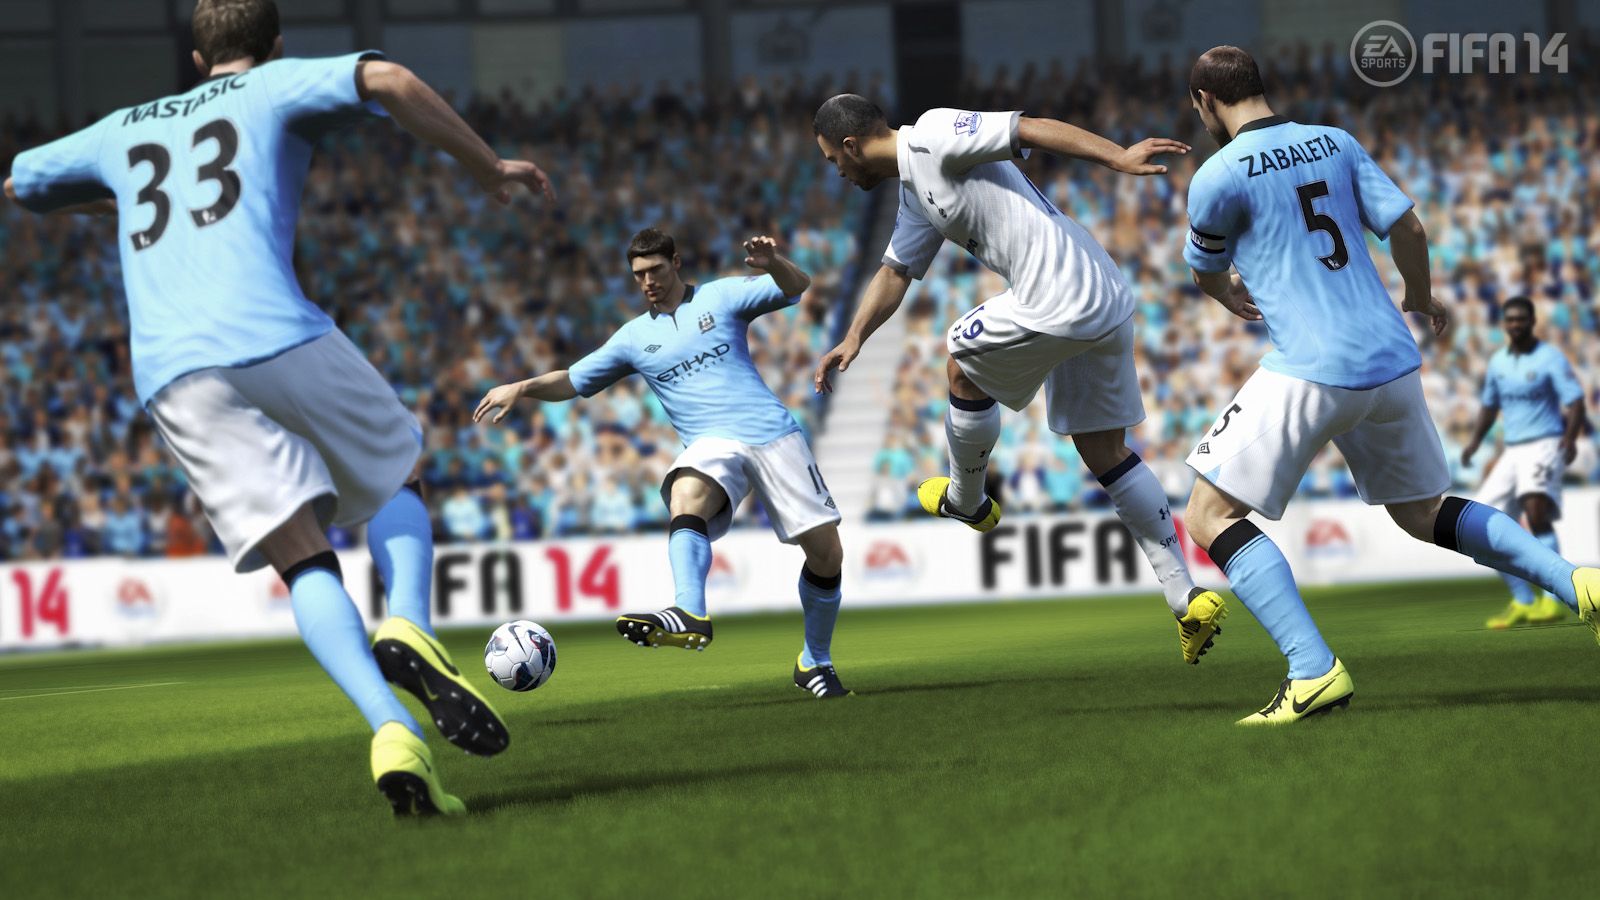 video game, fifa 14